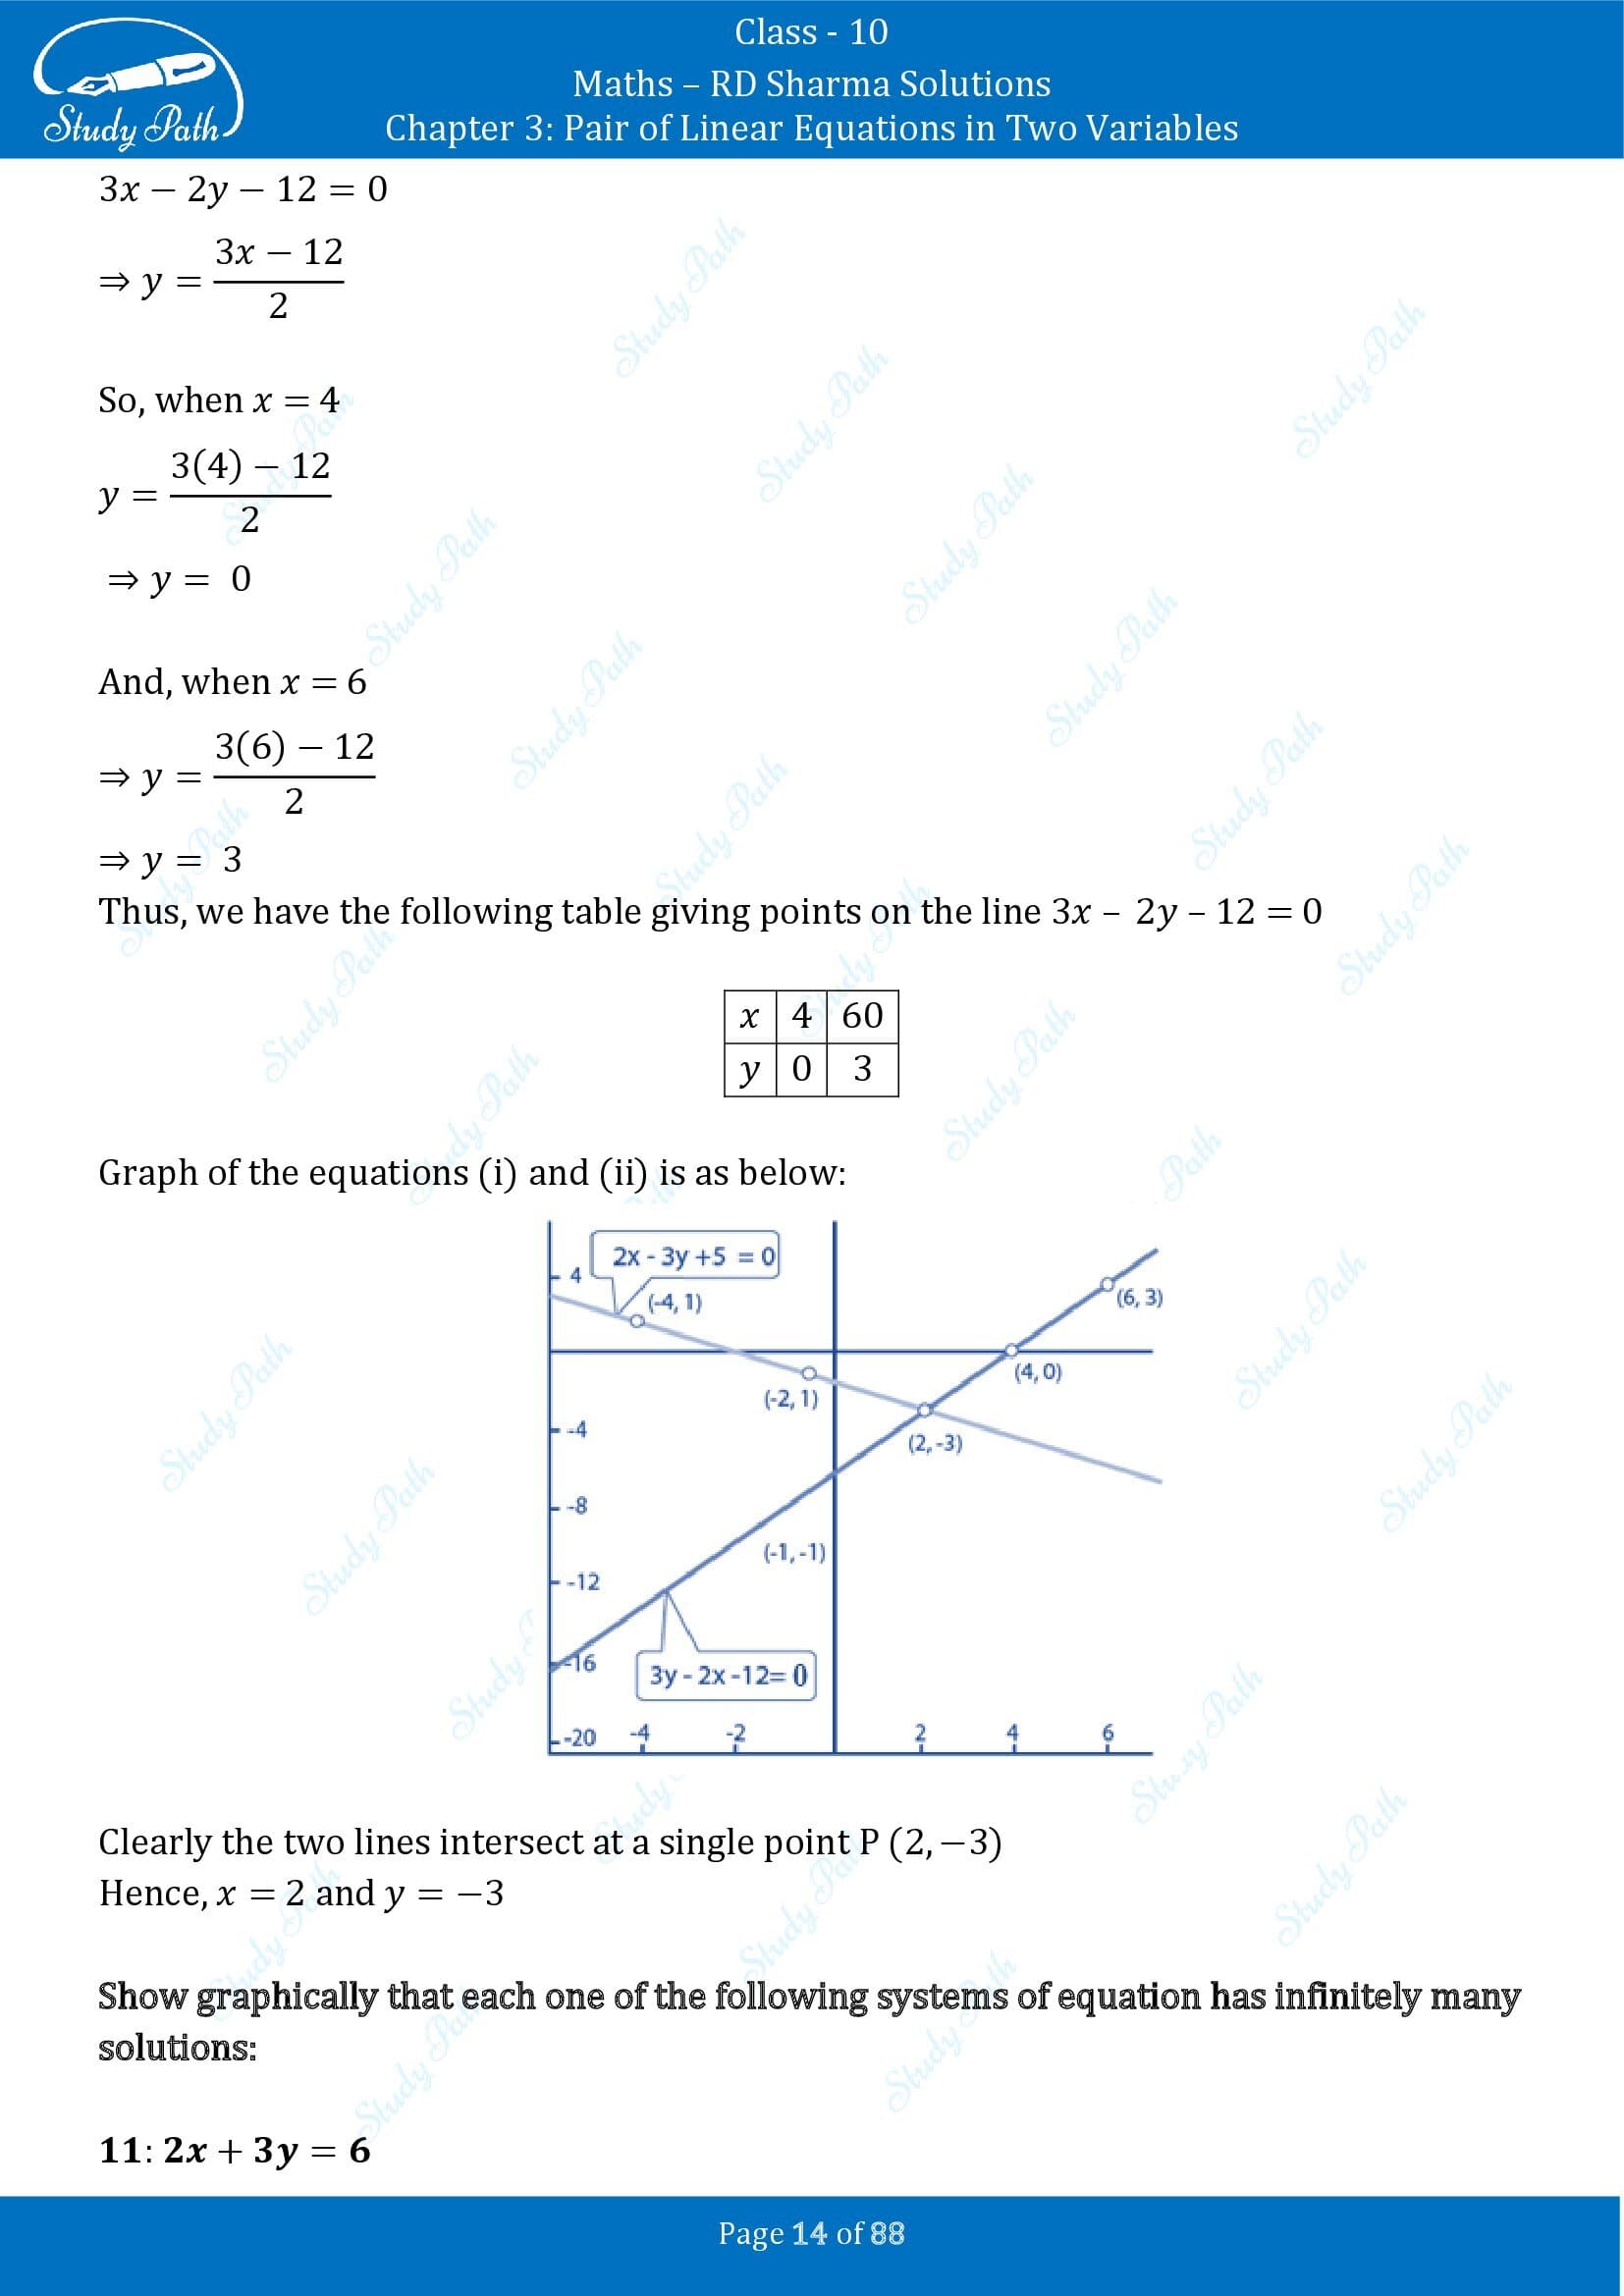 RD Sharma Solutions Class 10 Chapter 3 Pair of Linear Equations in Two Variables Exercise 3.2 00014